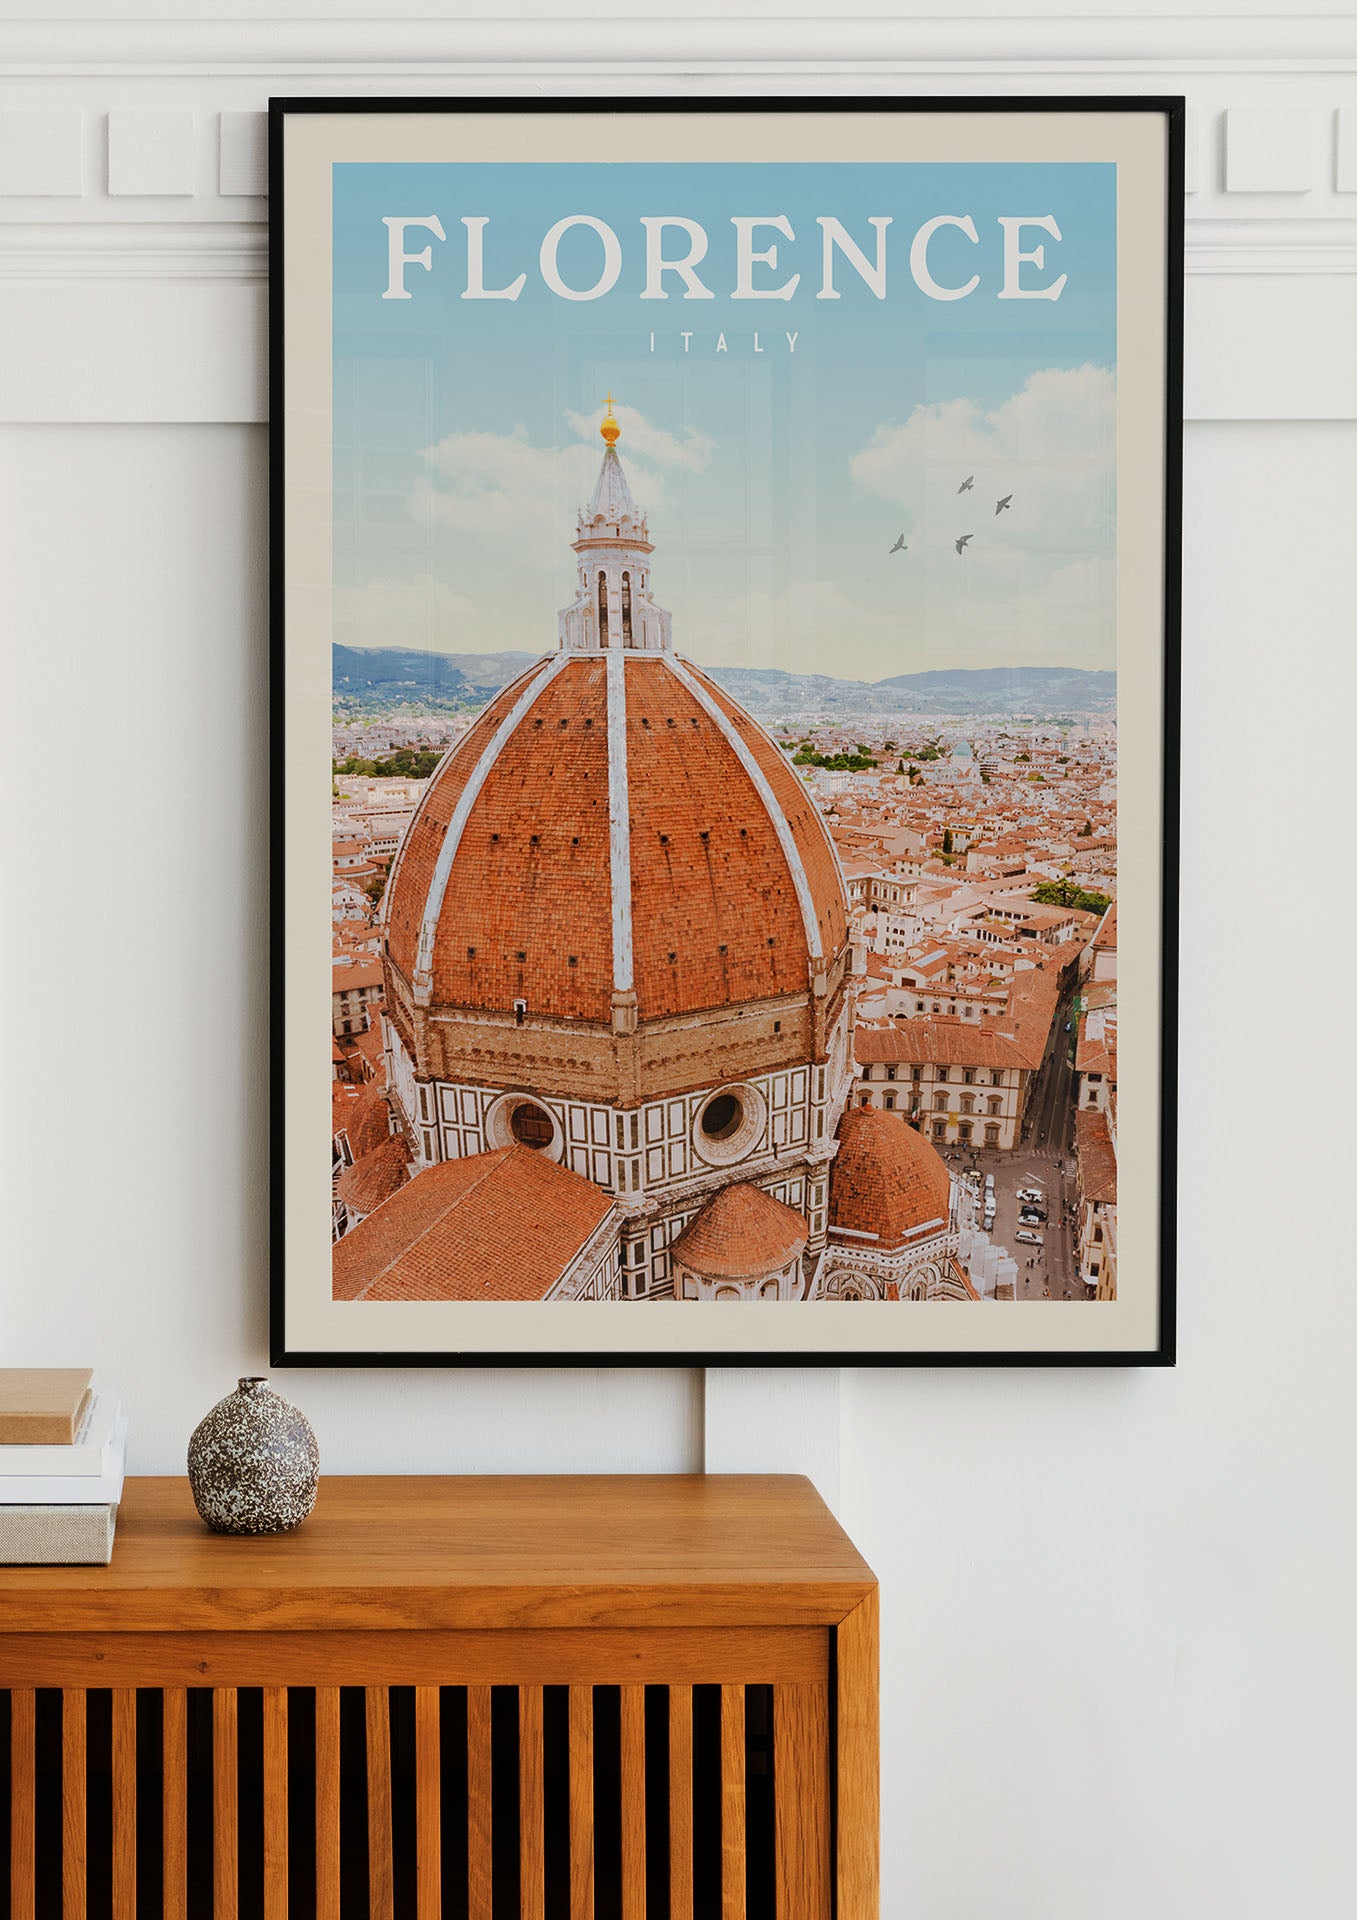 Florence, Italy - Vintage Travel Poster